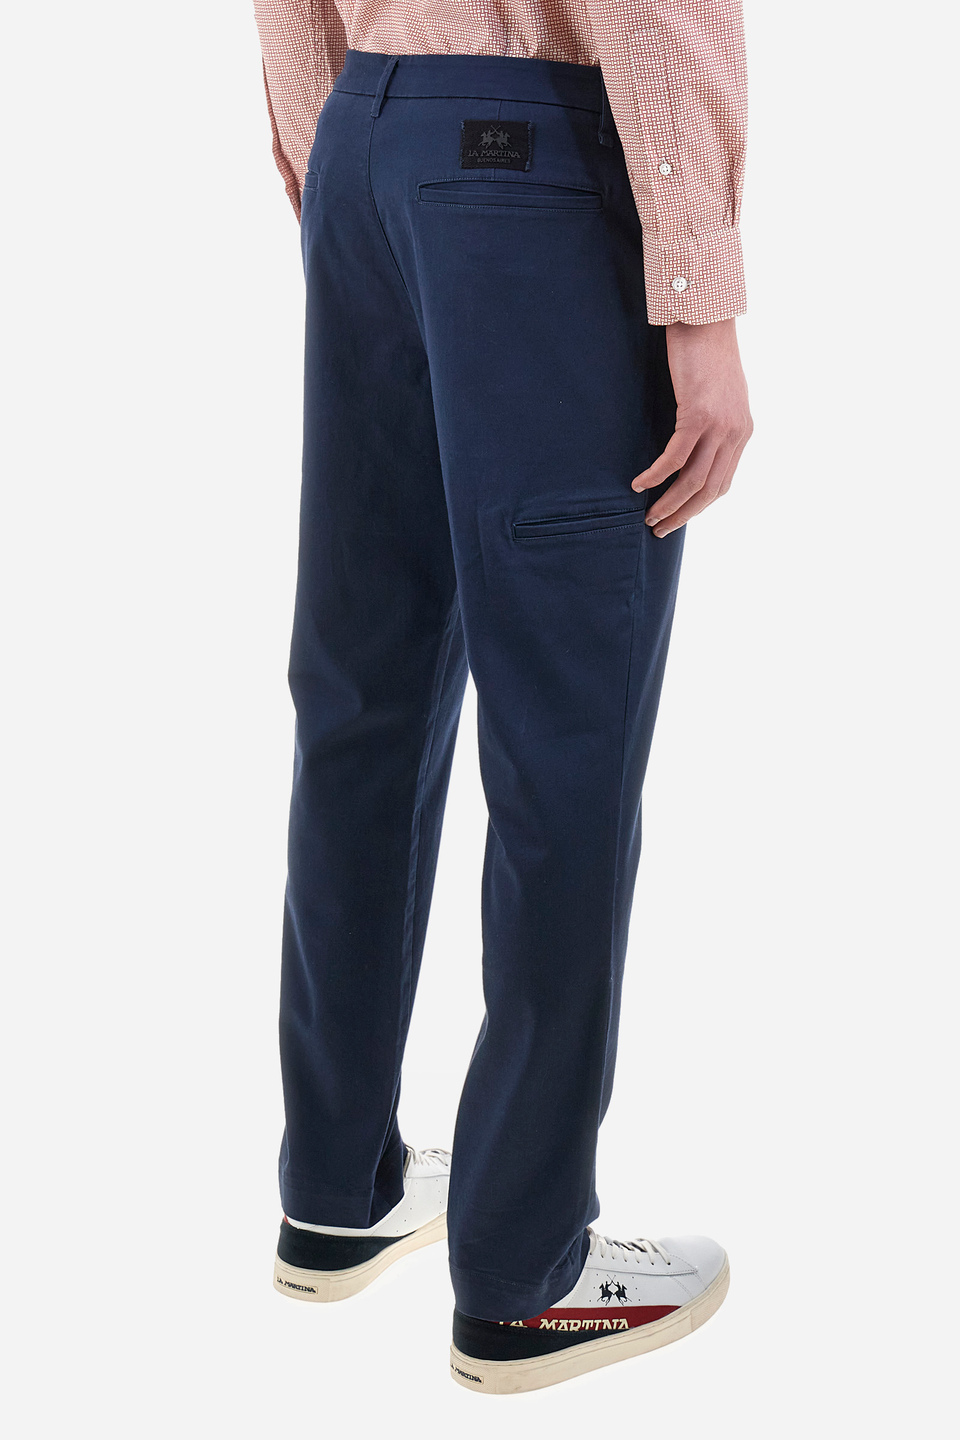 Men's chinos with a regular fit - Yirmeyahu | La Martina - Official Online Shop